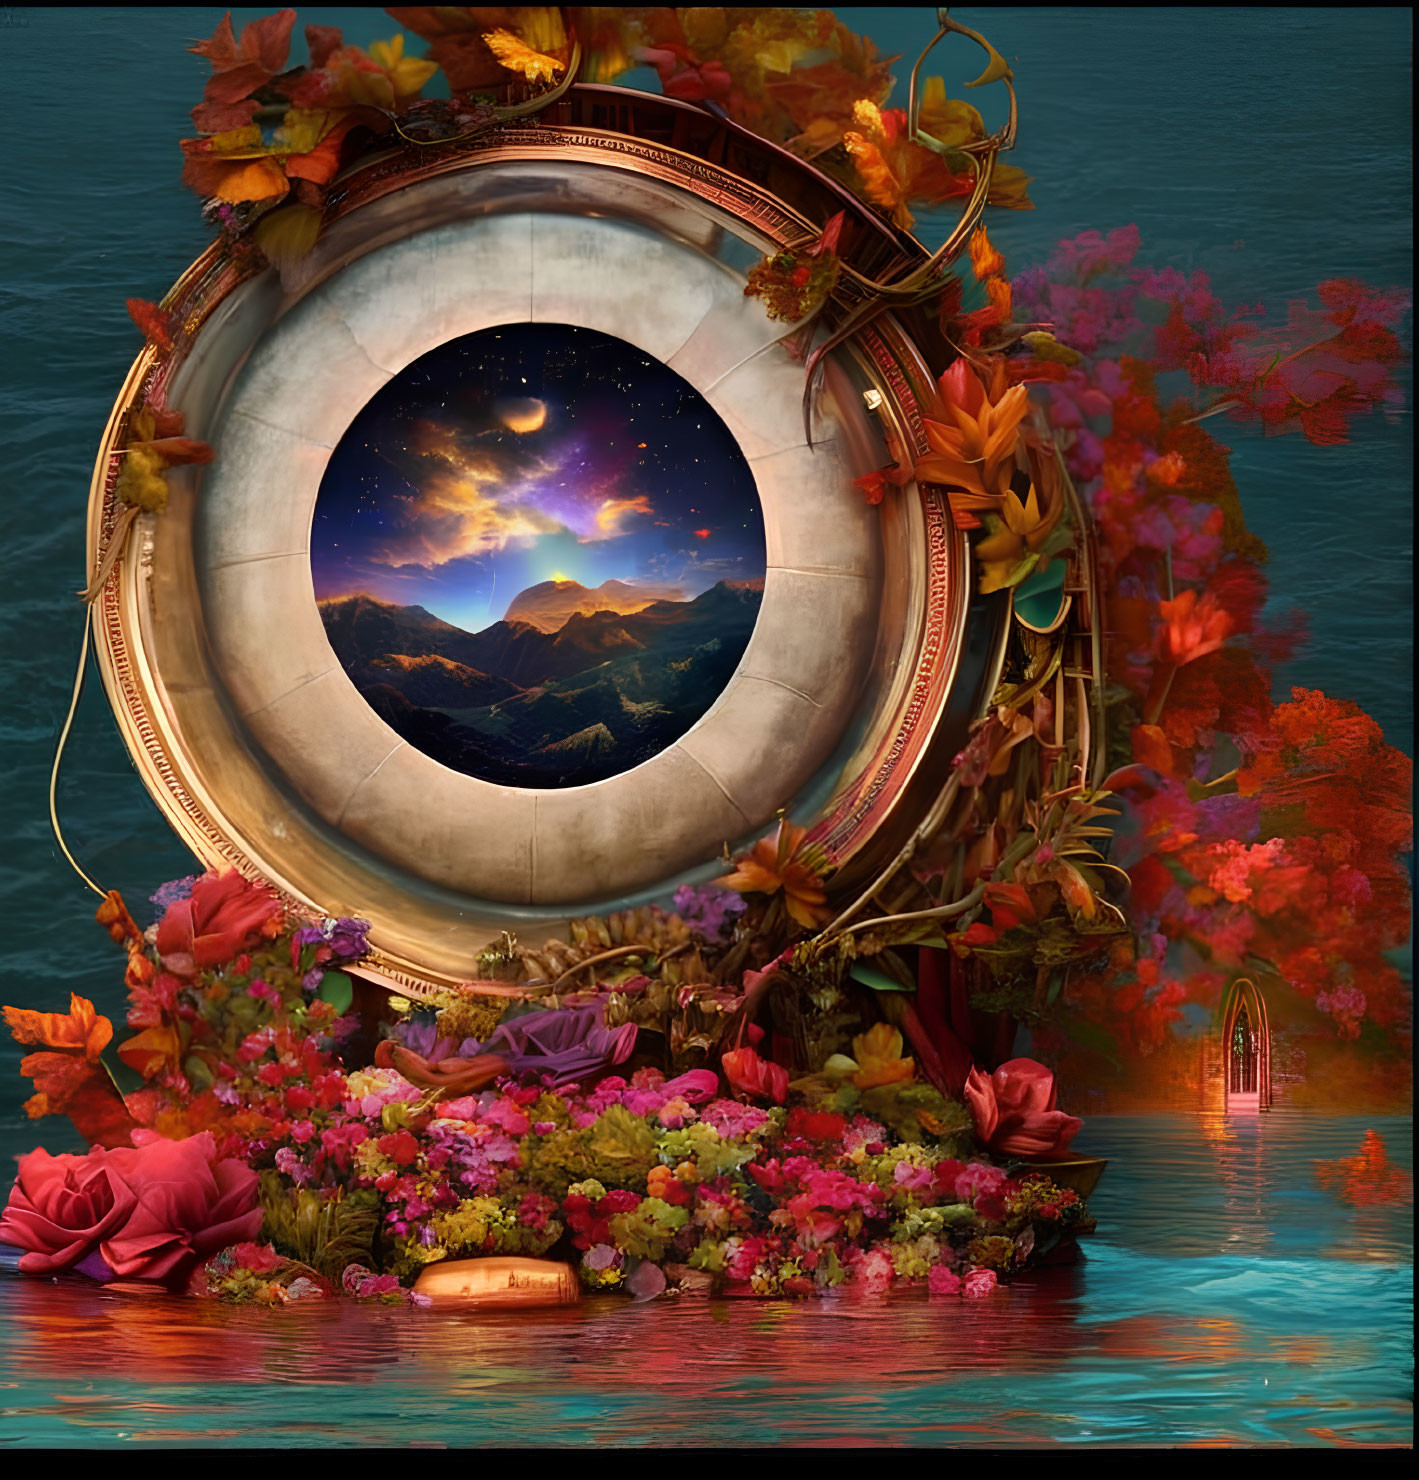 Circular frame of night sky over mountains, surrounded by flowers and foliage with illuminated doorway.